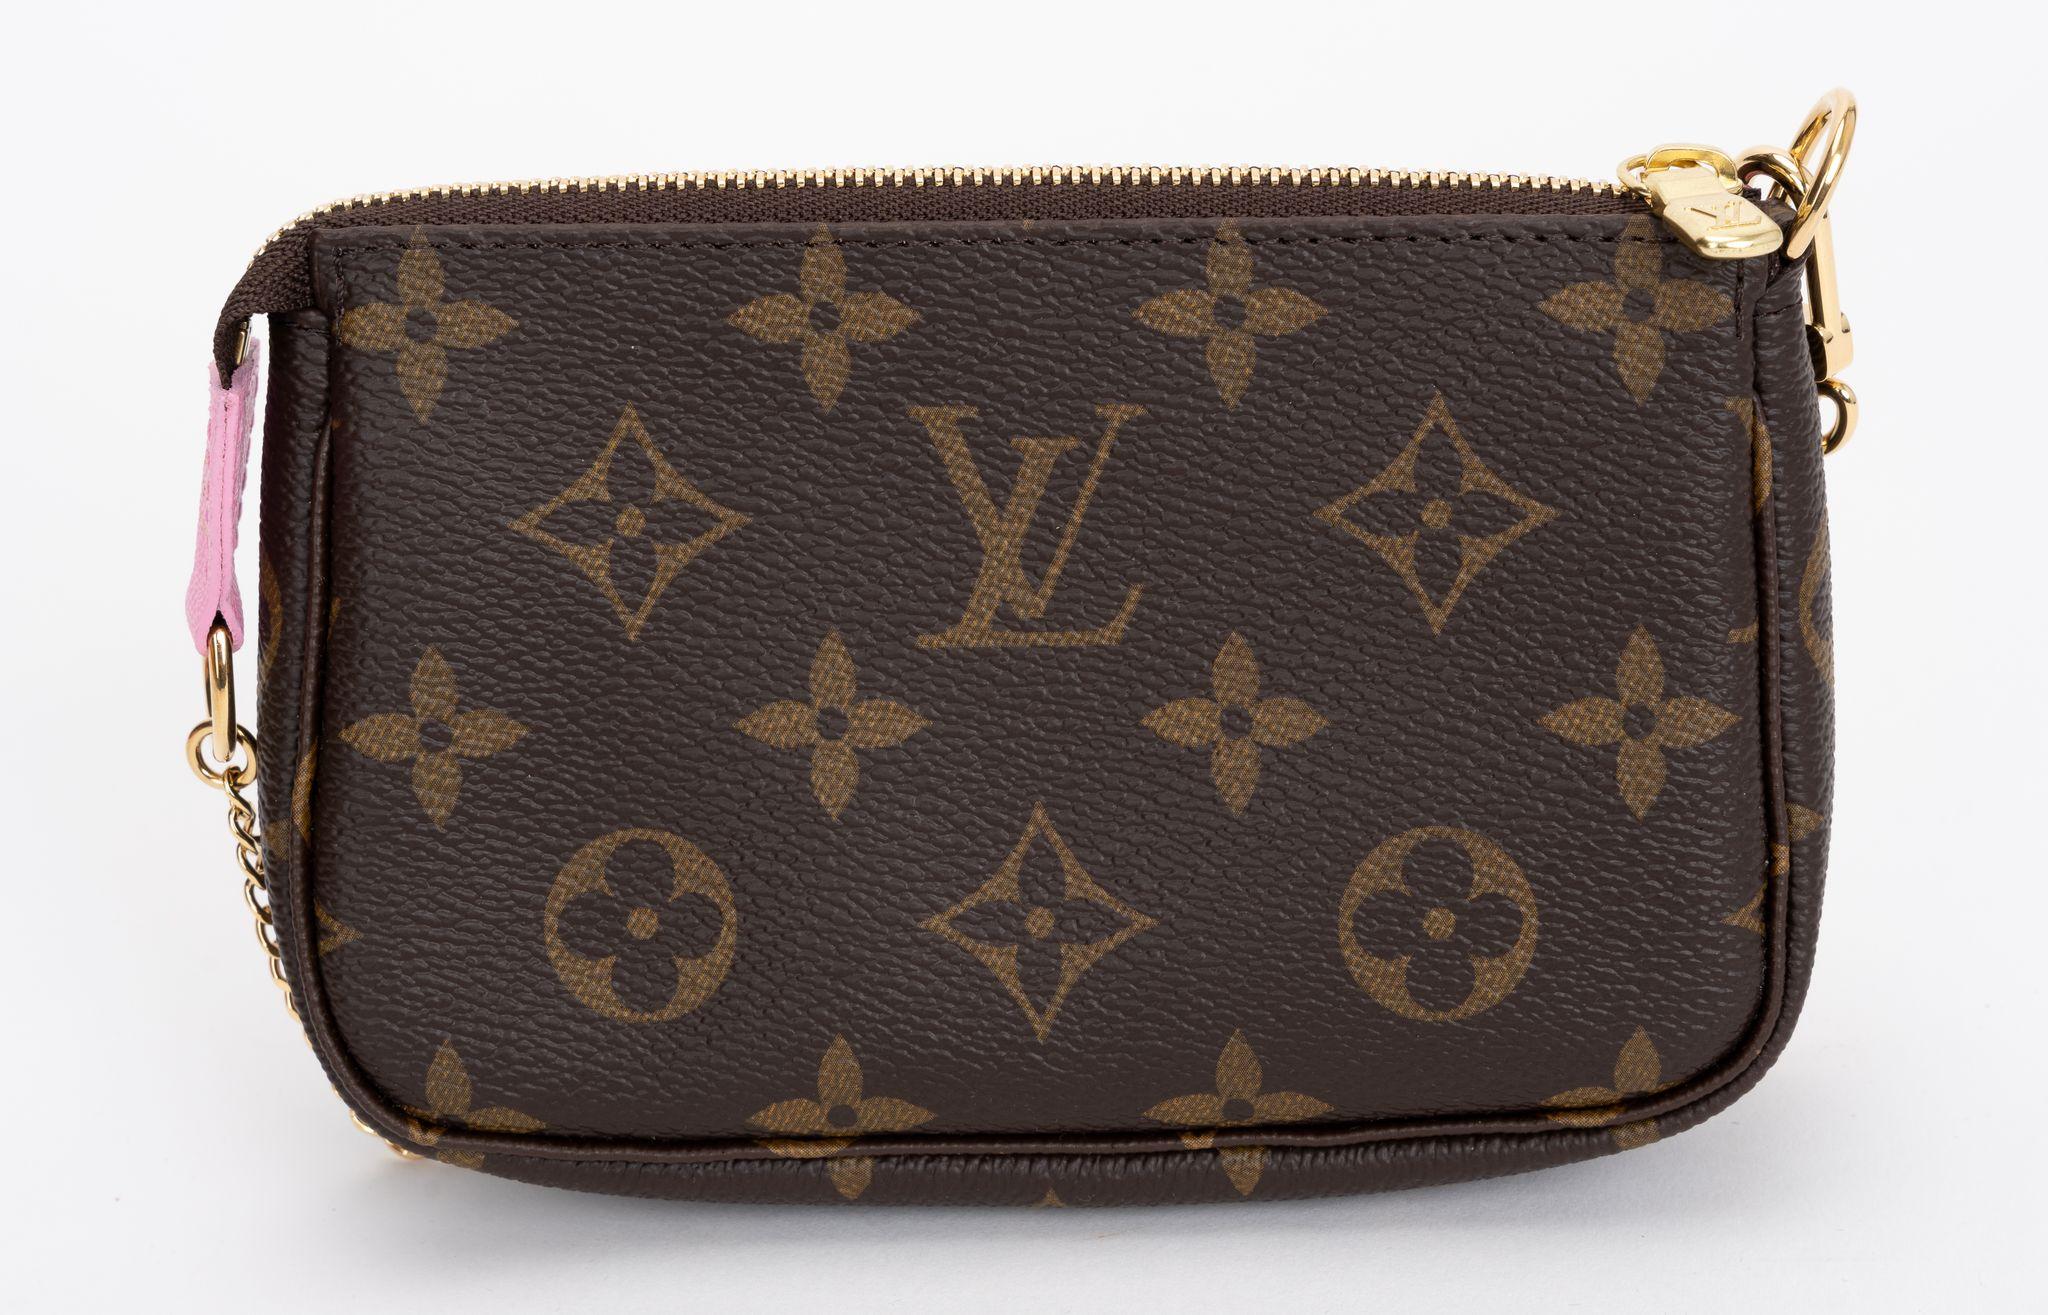 The Louis Vuitton Mini Pochette is made from monogram canvas and cowhide trim, with zipper closure. It is part of the limited edition 2023 Christmas collection. The Pochettes are decorated with an exclusive print of House mascot Vivienne and her